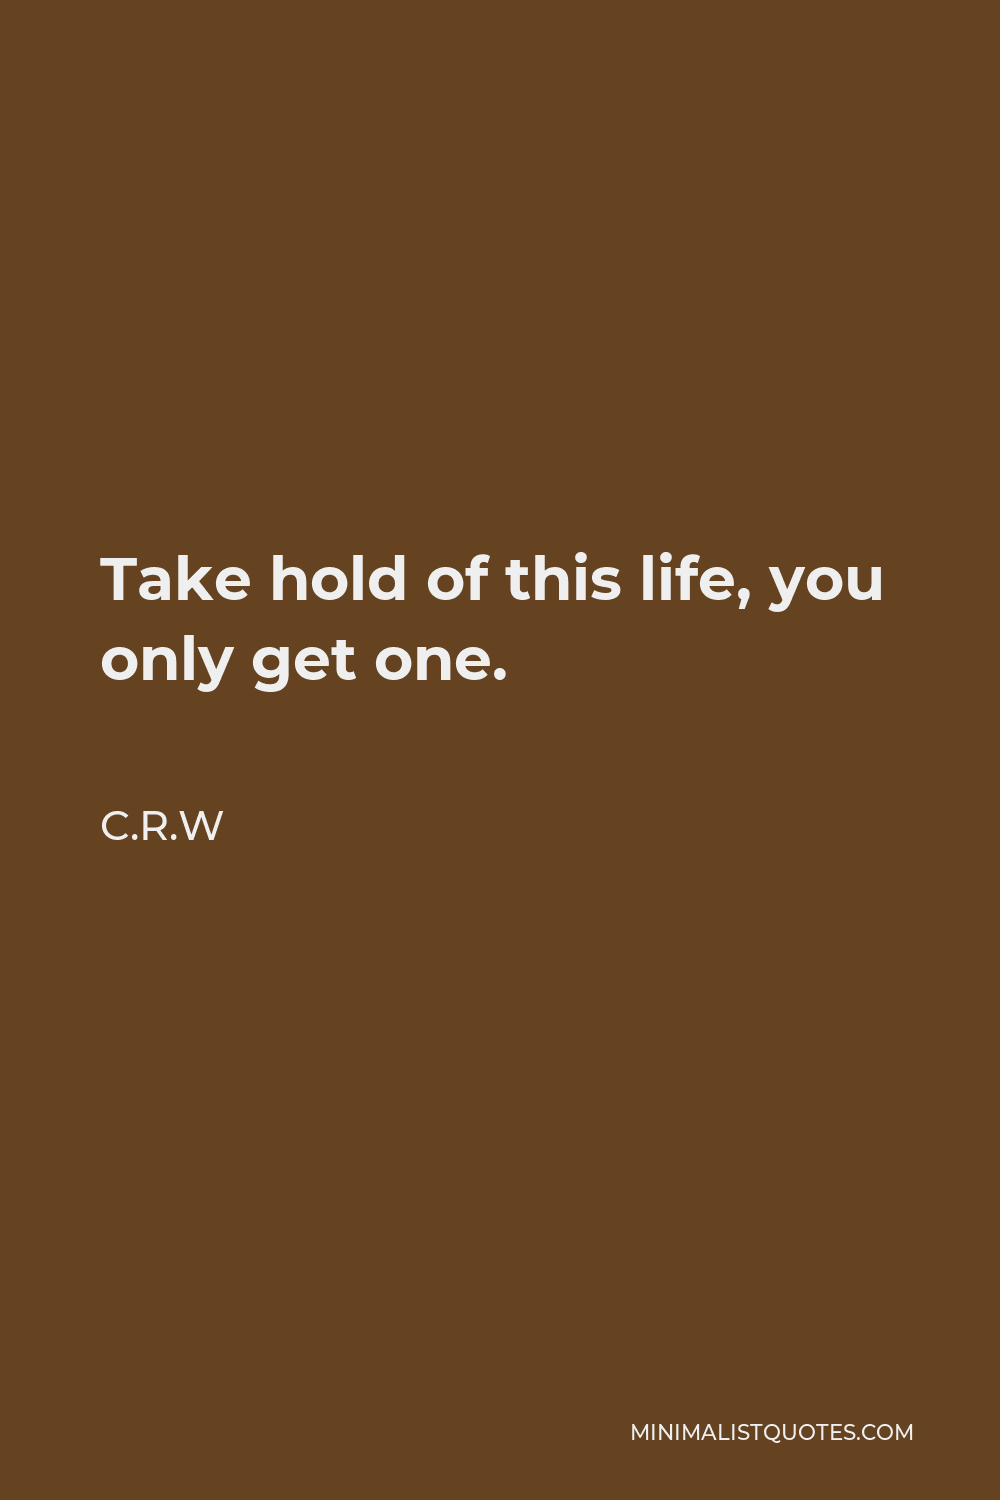 C.R.W Quote - Take hold of this life, you only get one.